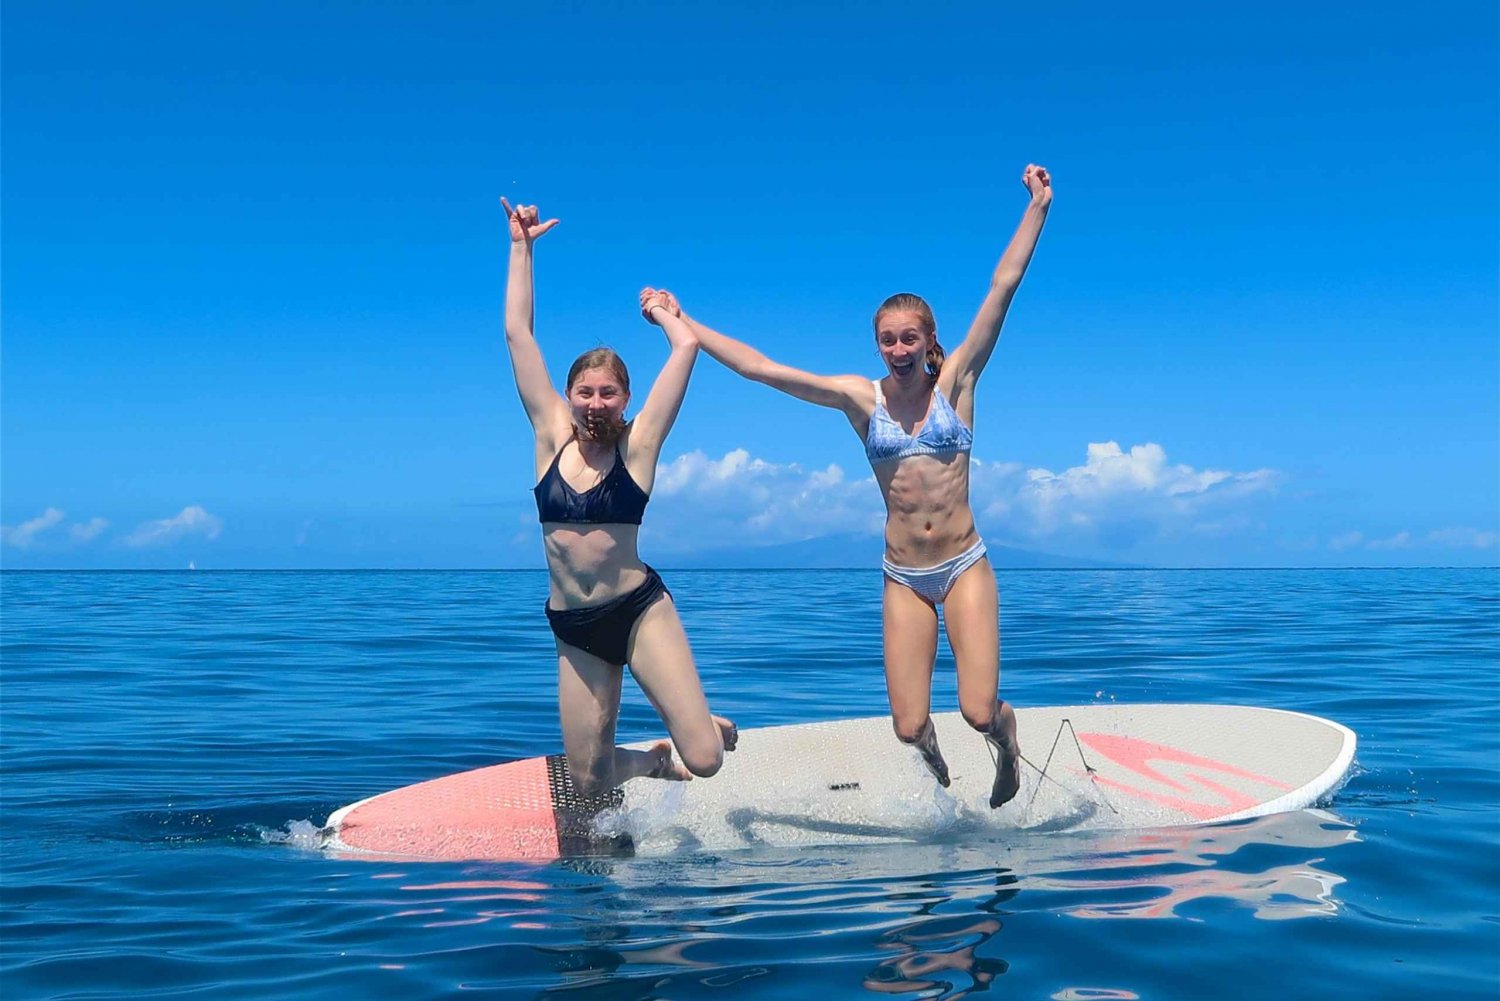 Maui: Beginner Level Private Stand-Up Paddleboard Lesson